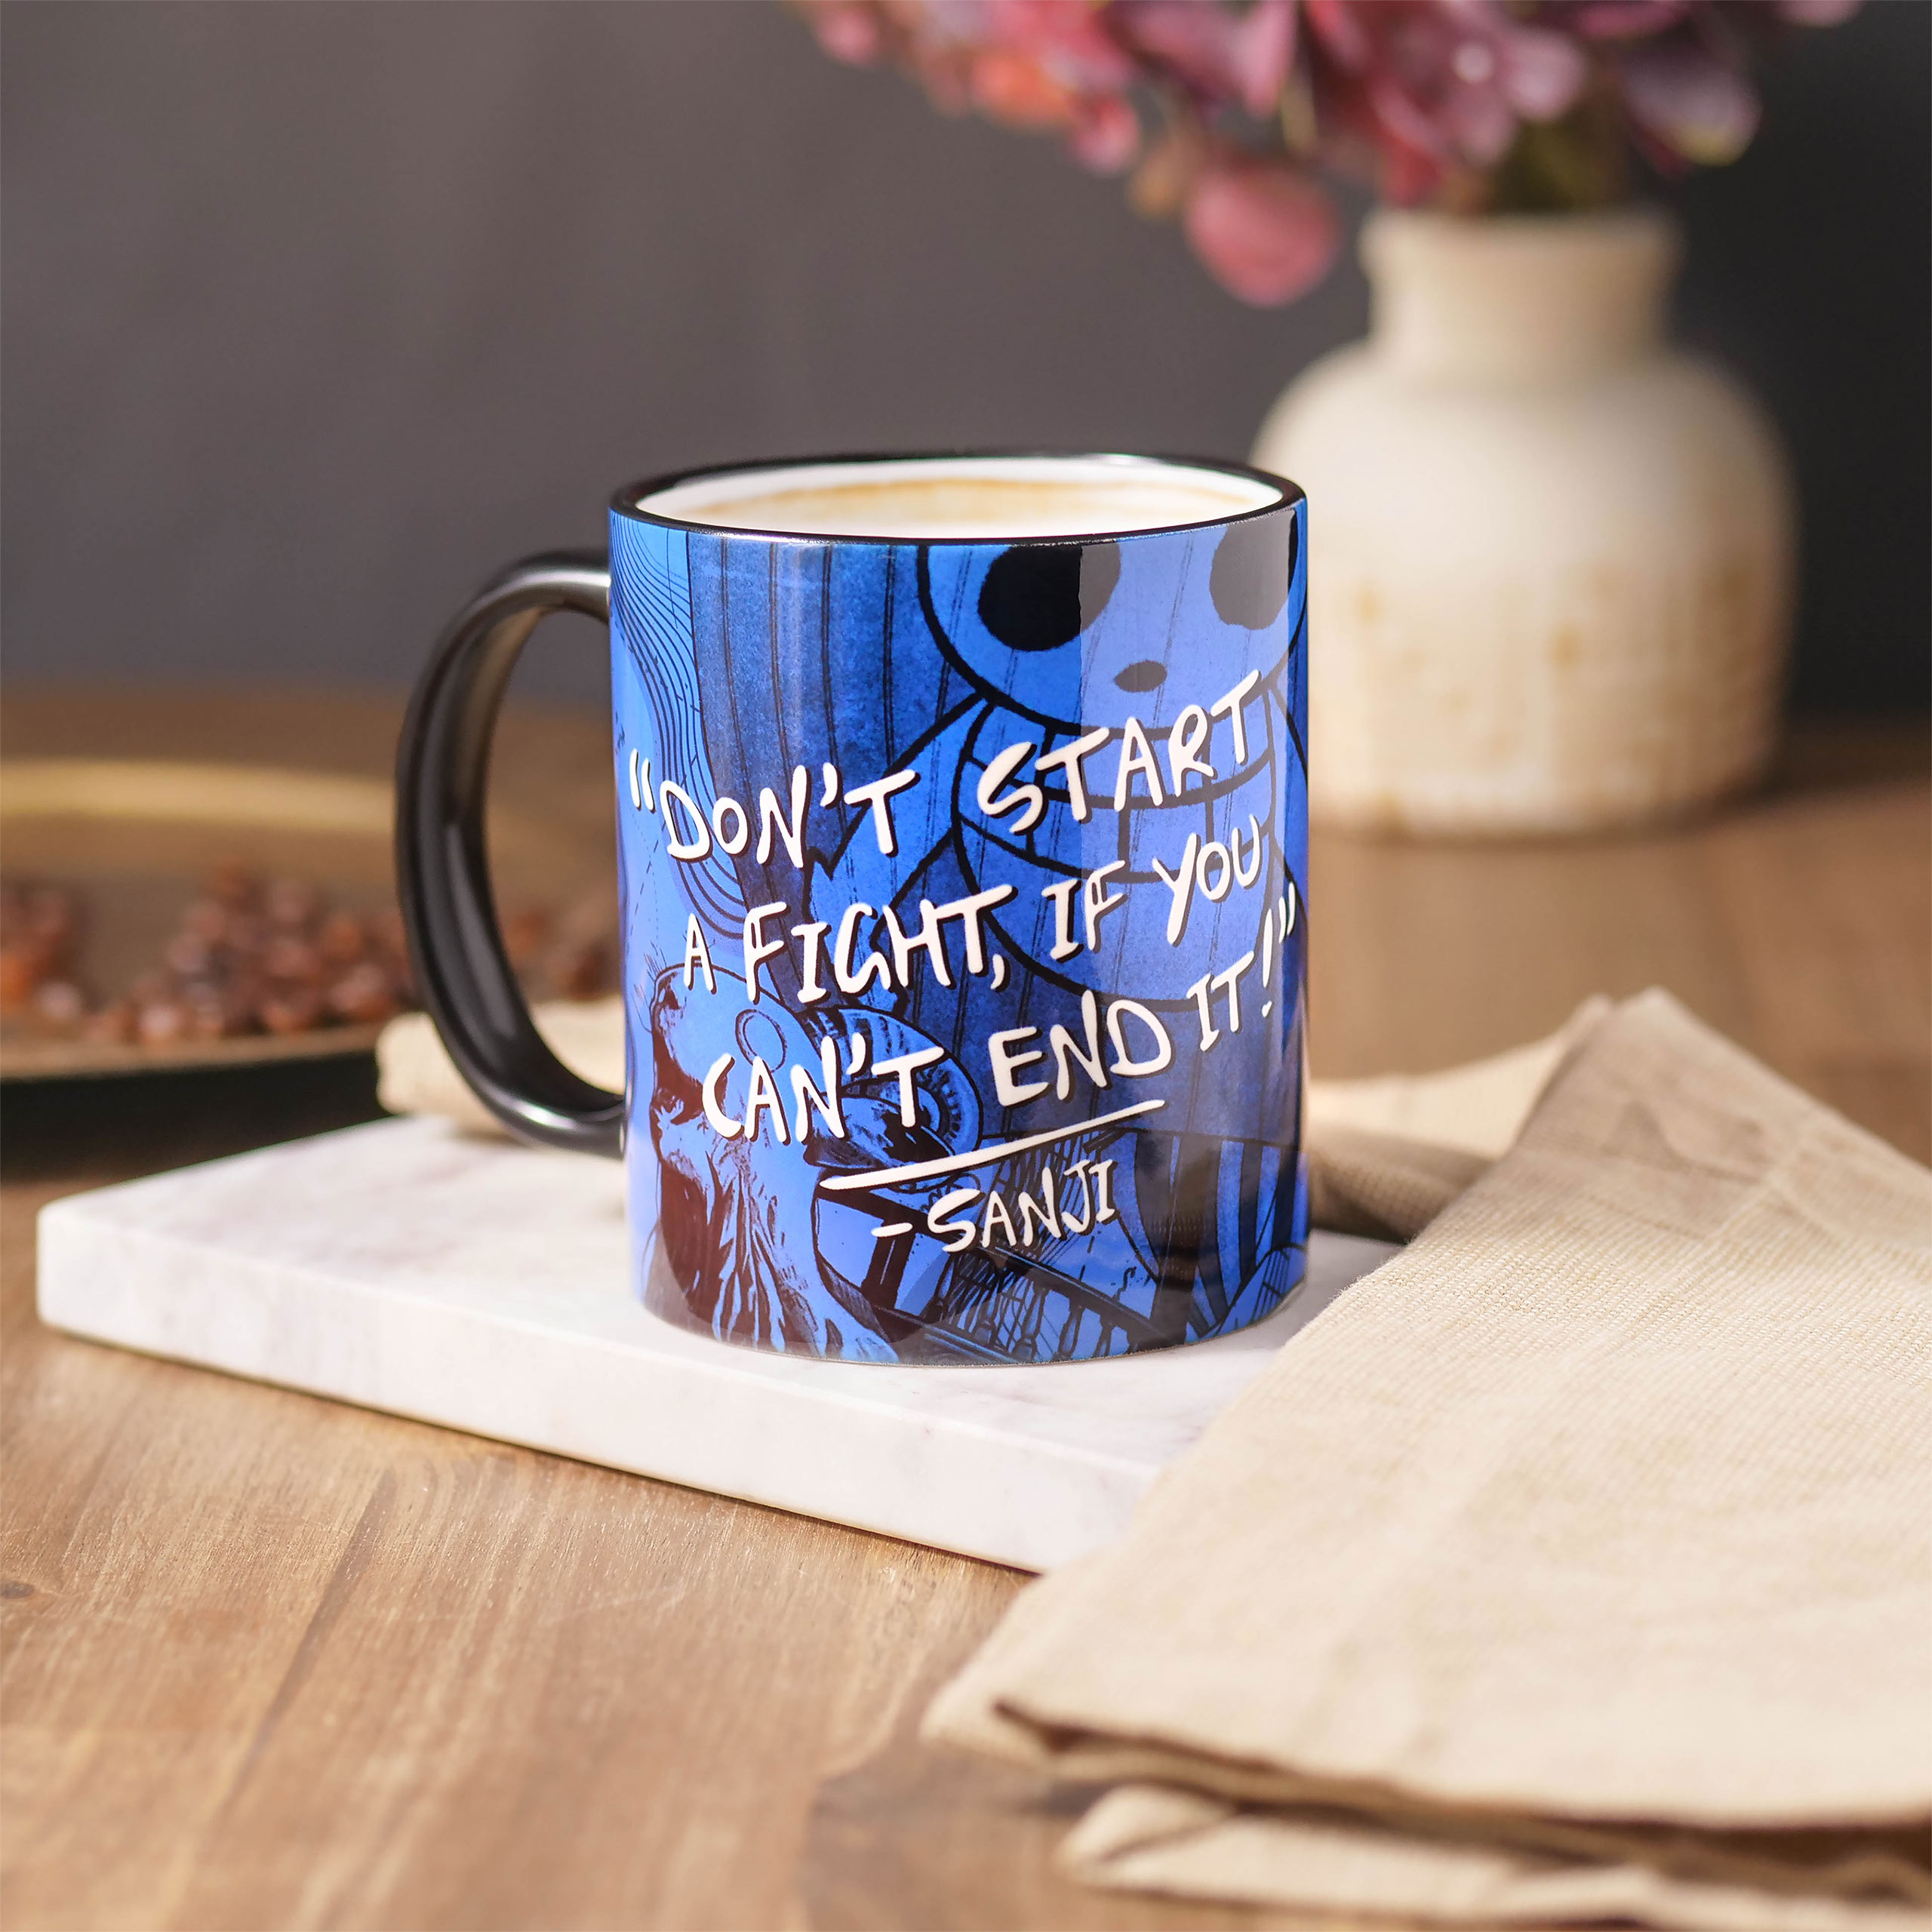 Sanji End a Fight Cup - One Piece